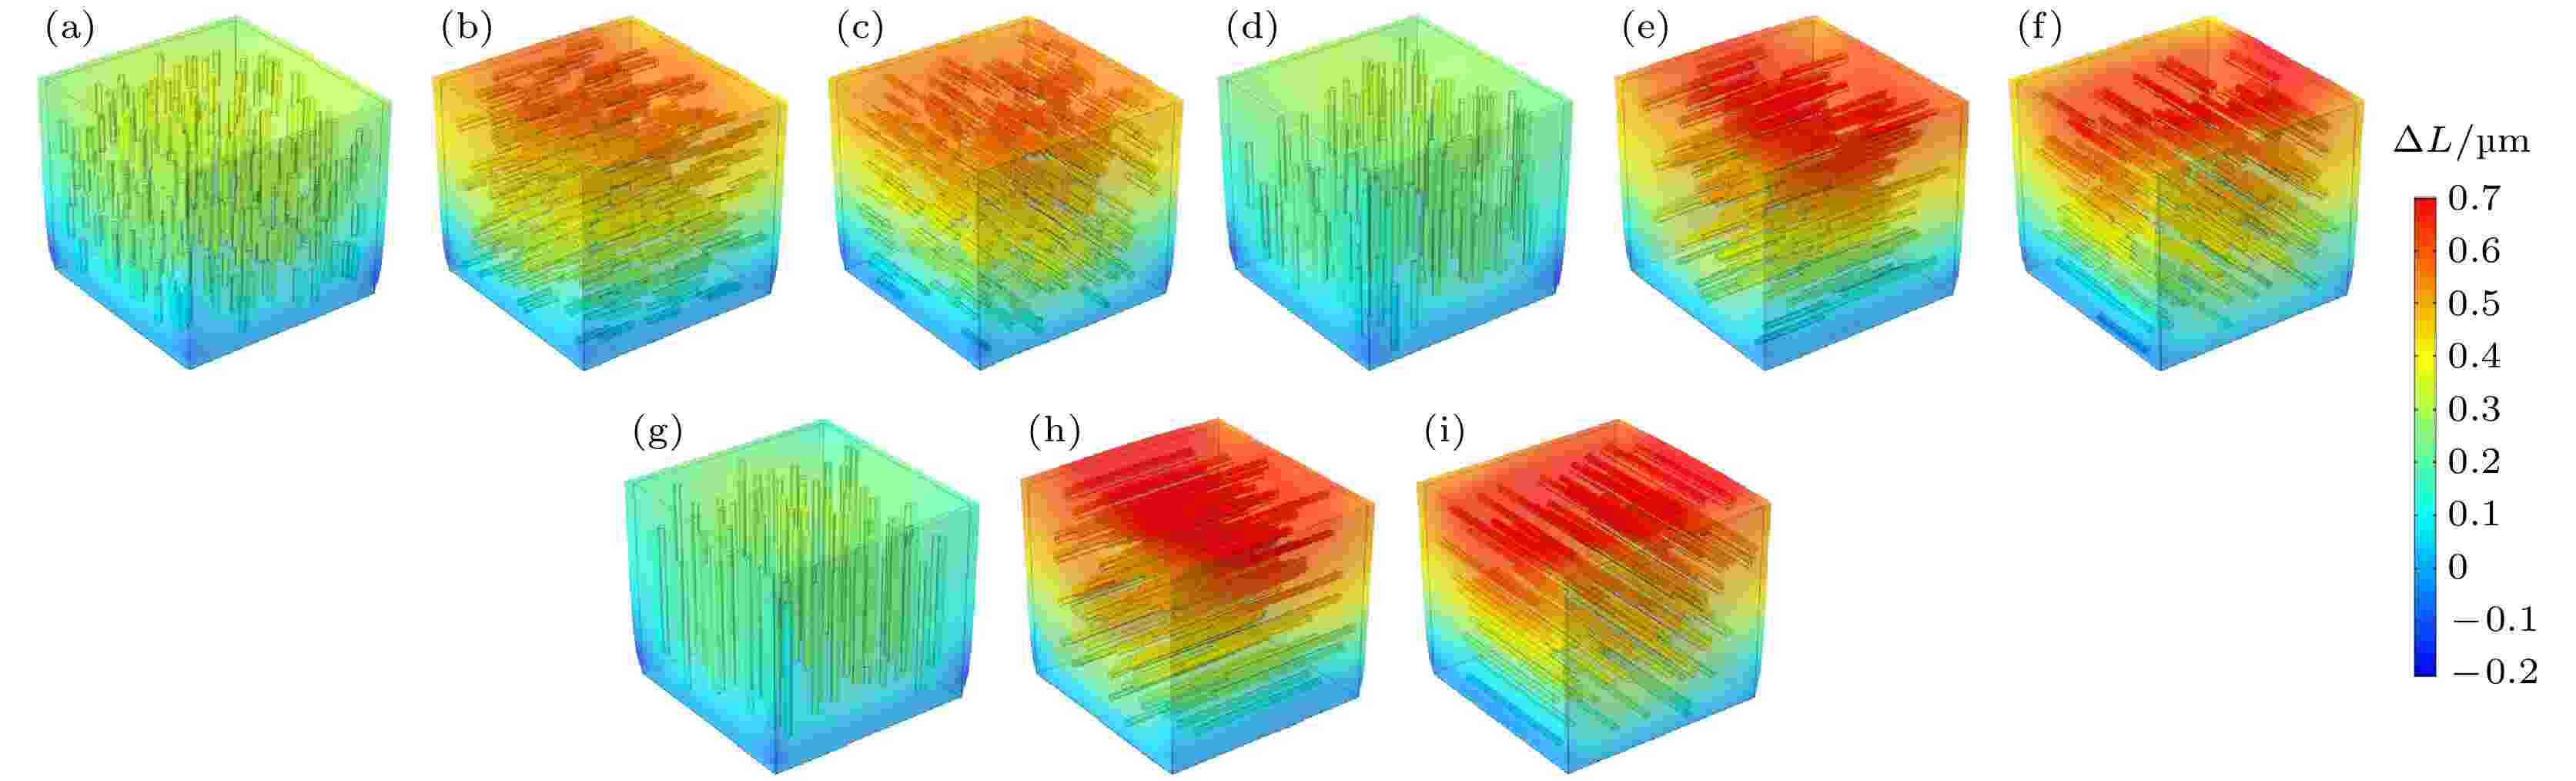 Numerical simulation of thermal and dielectric properties for SiO2 